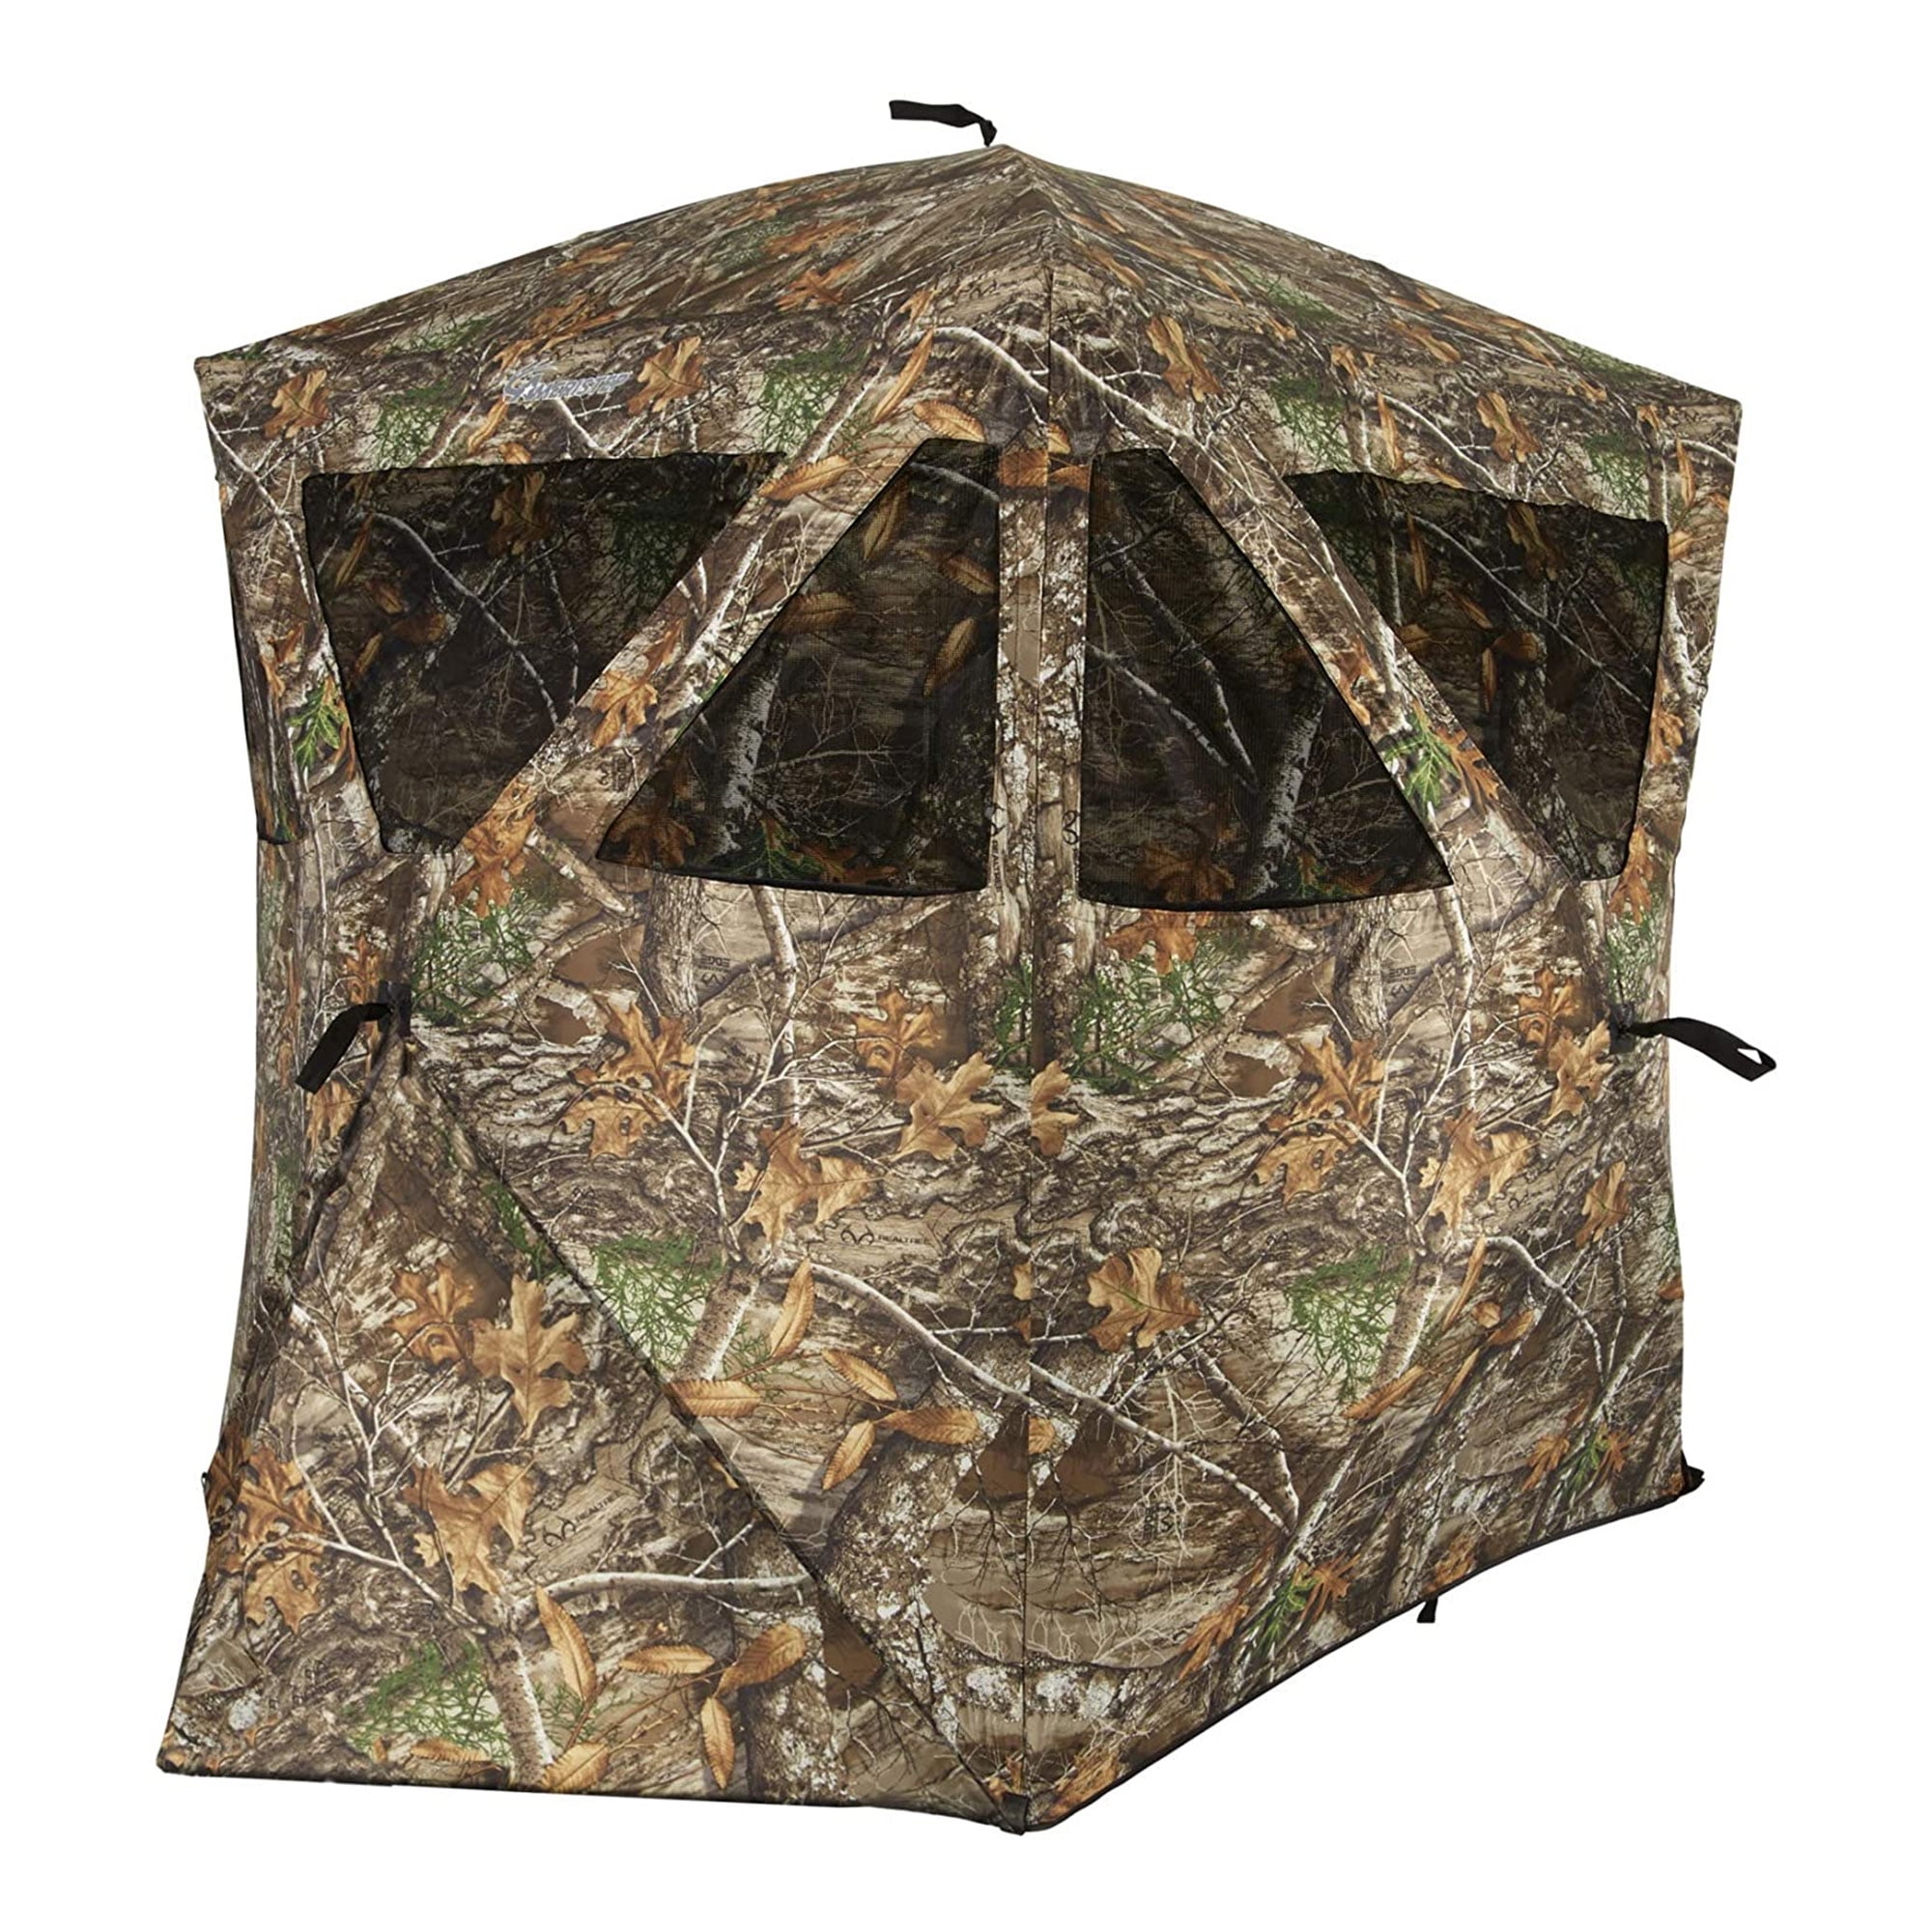 Outdoor Professional Pop-up Hunting Blind Tent Camouflage with Zero Detection 